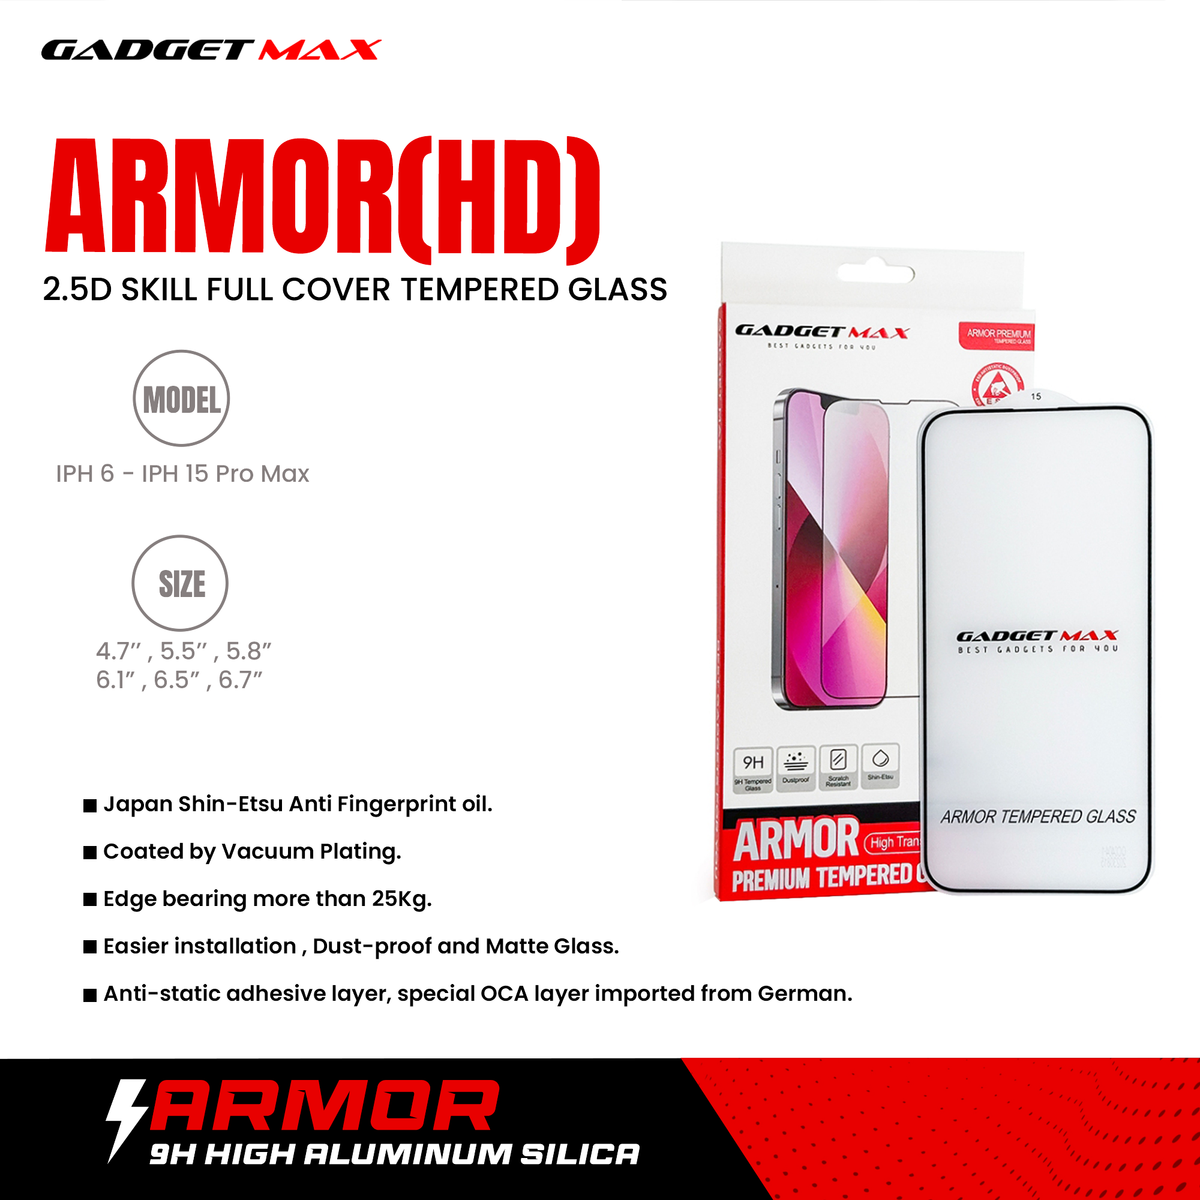 GADGET MAX Armor(HD) iPhone 13 / 13 Pro / 14 6.1" 2.5D Anti-Static Tempered Glass